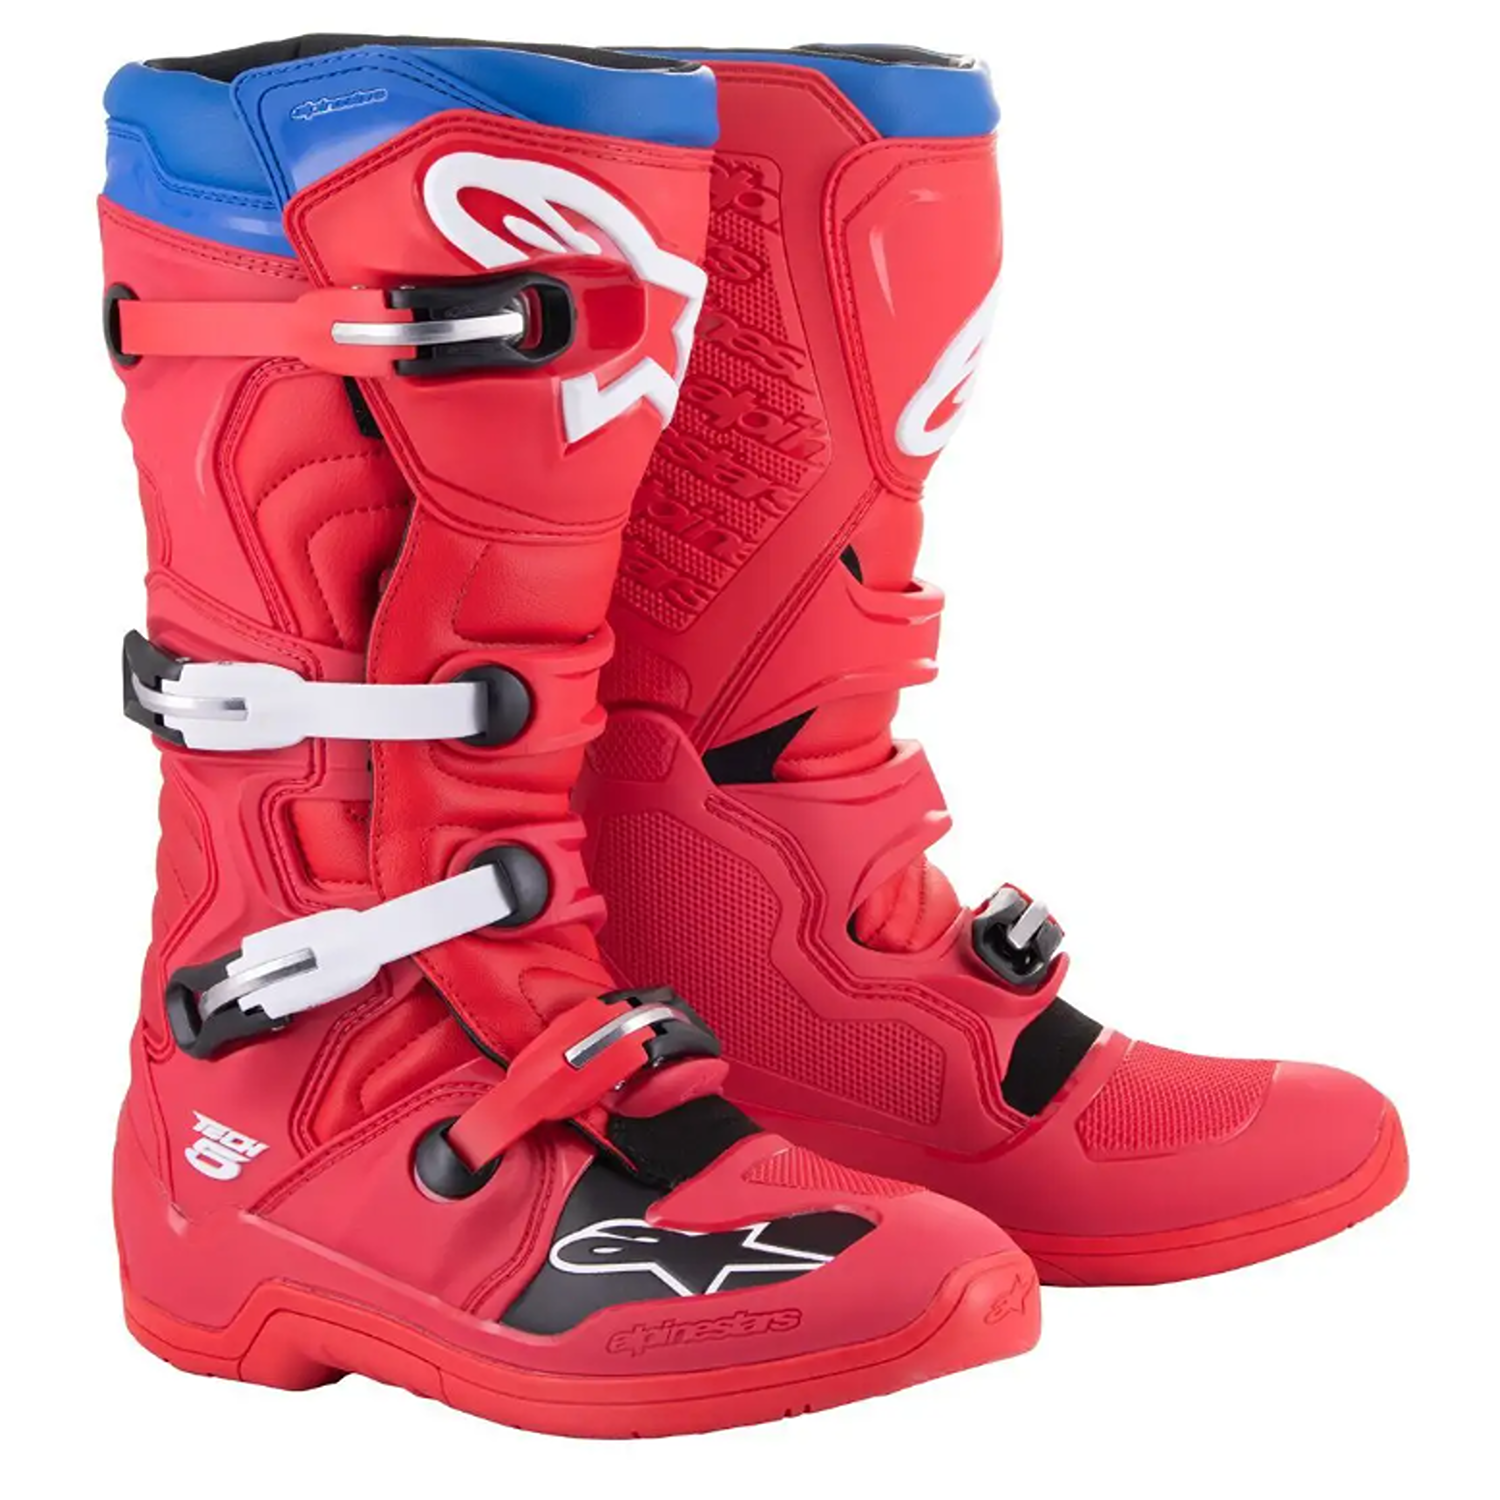 Image of EU Alpinestars Tech 5 Boots Bright Red Dark Red Blue Taille US 12